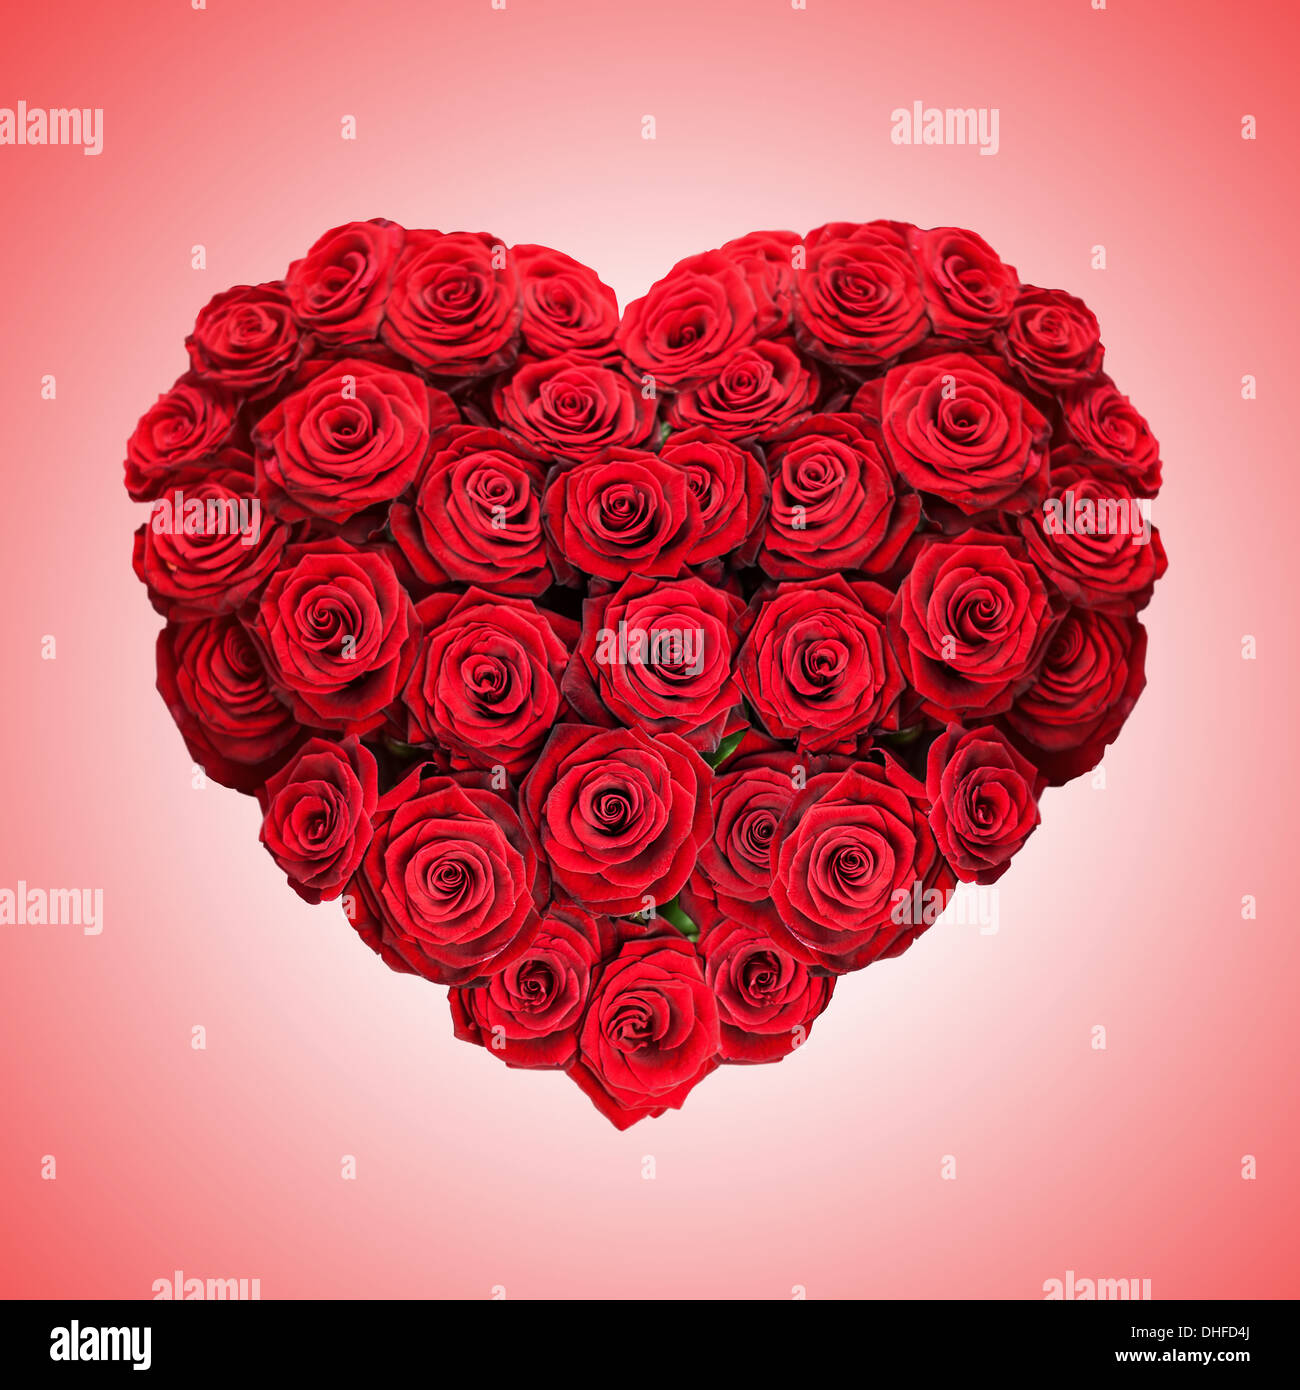 VL love initial with red heart and rose Stock Vector